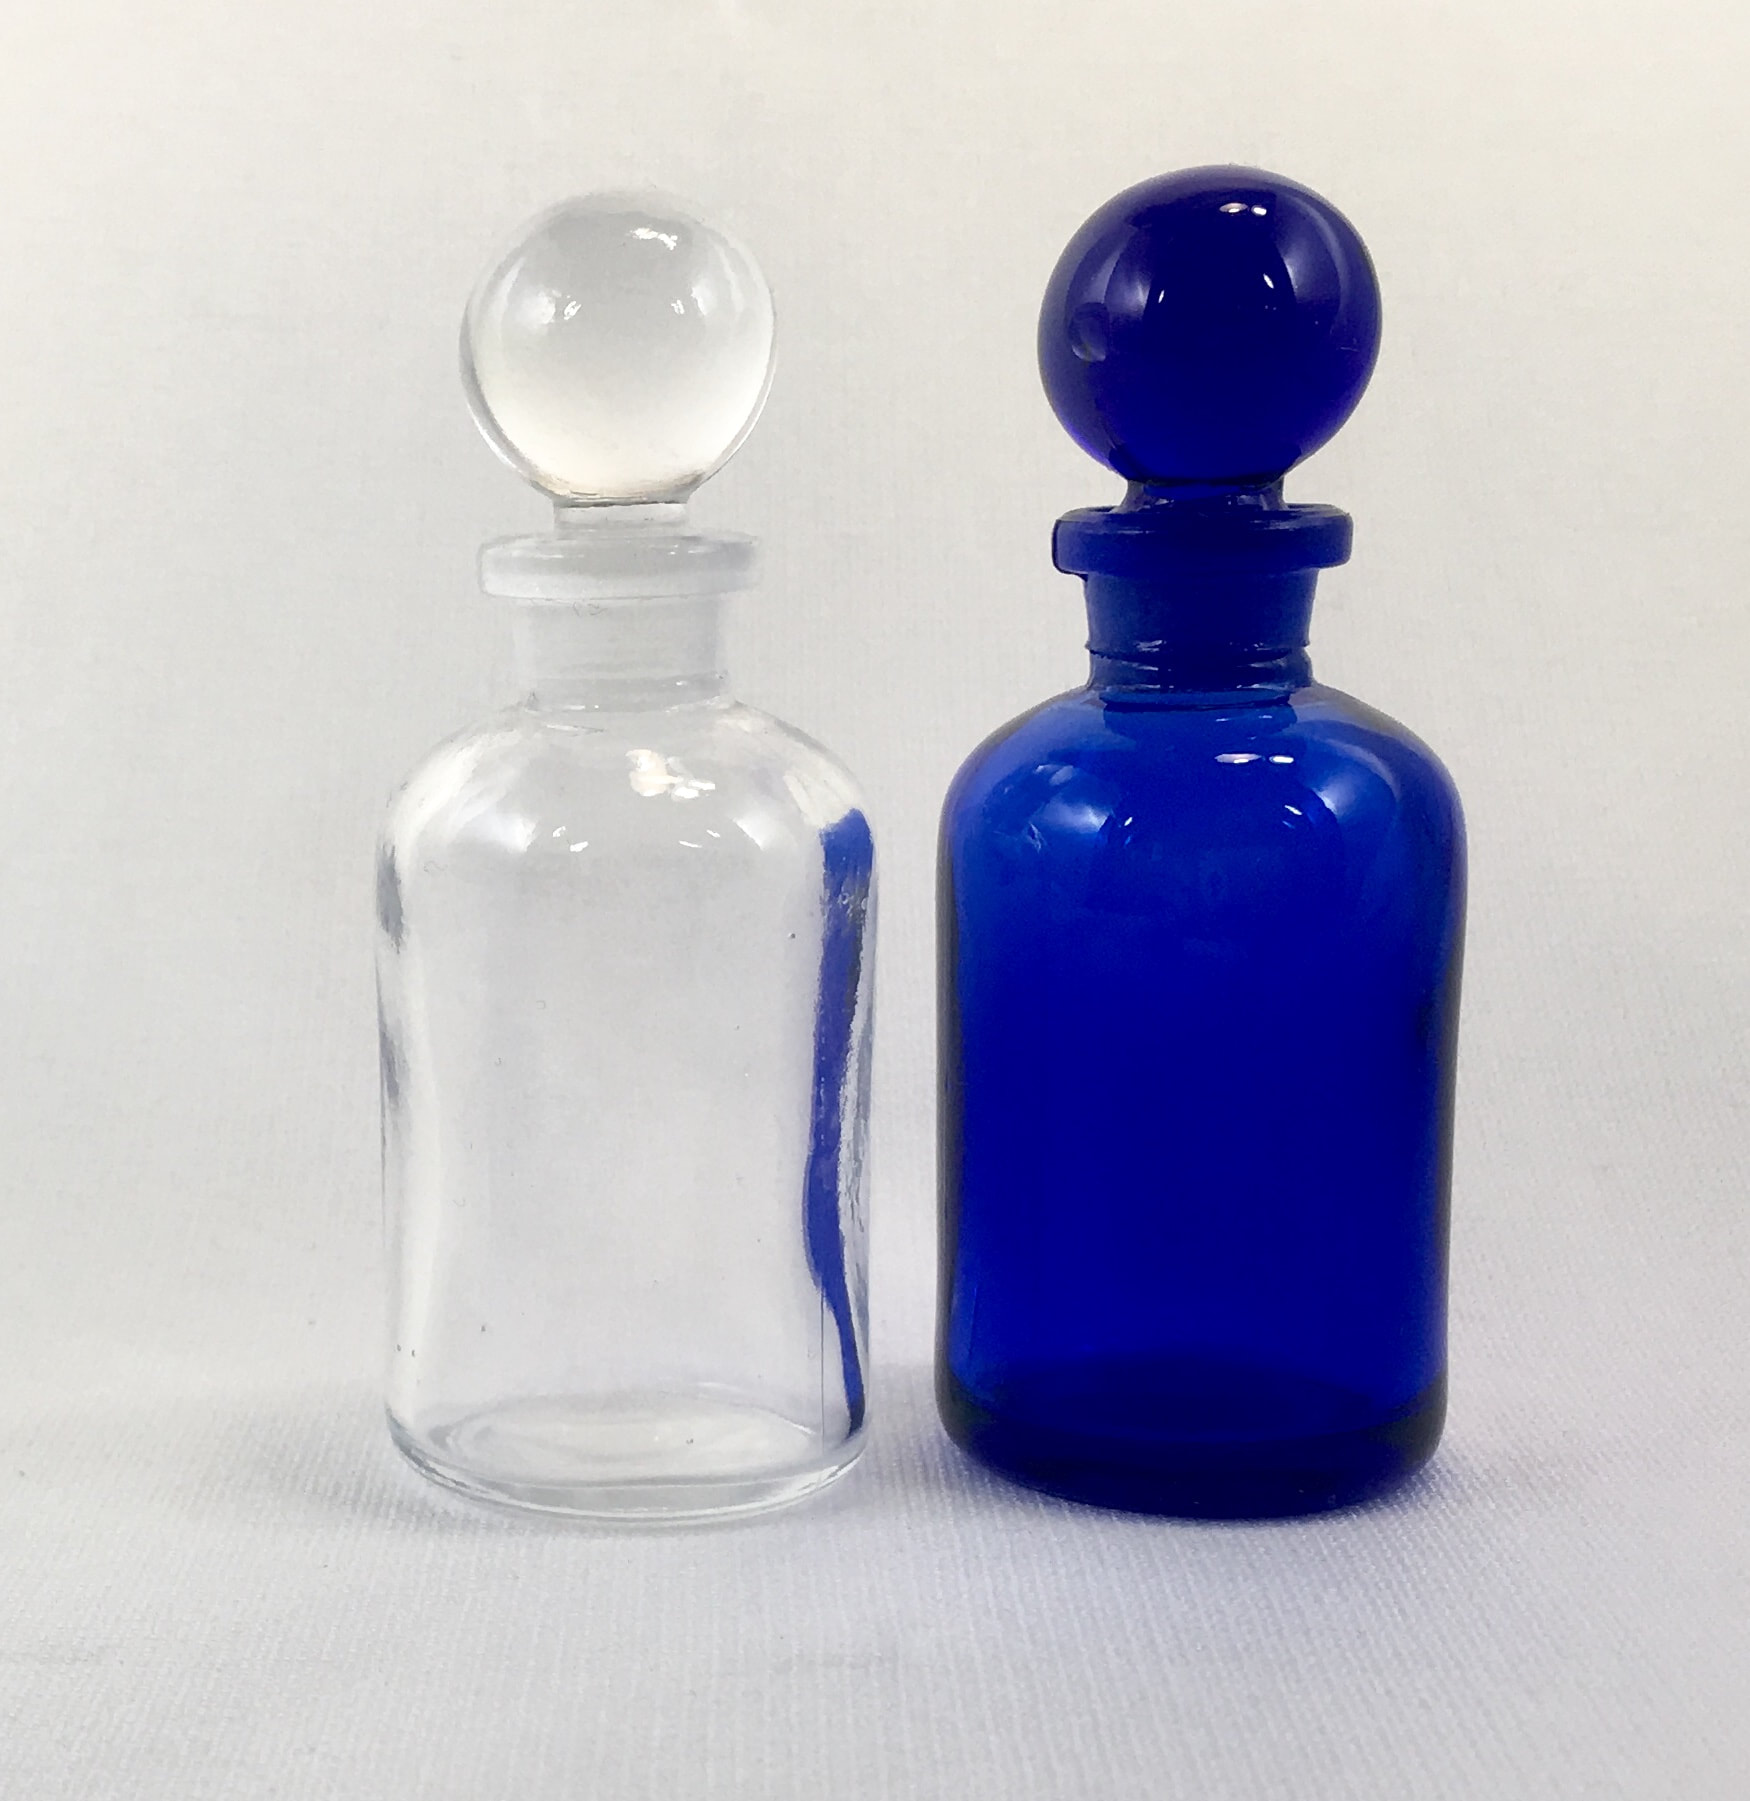 Download Refillable Clear Glass Apothecary Bottle | 1oz Glass Bottles | Perfume, Cologne, Oils